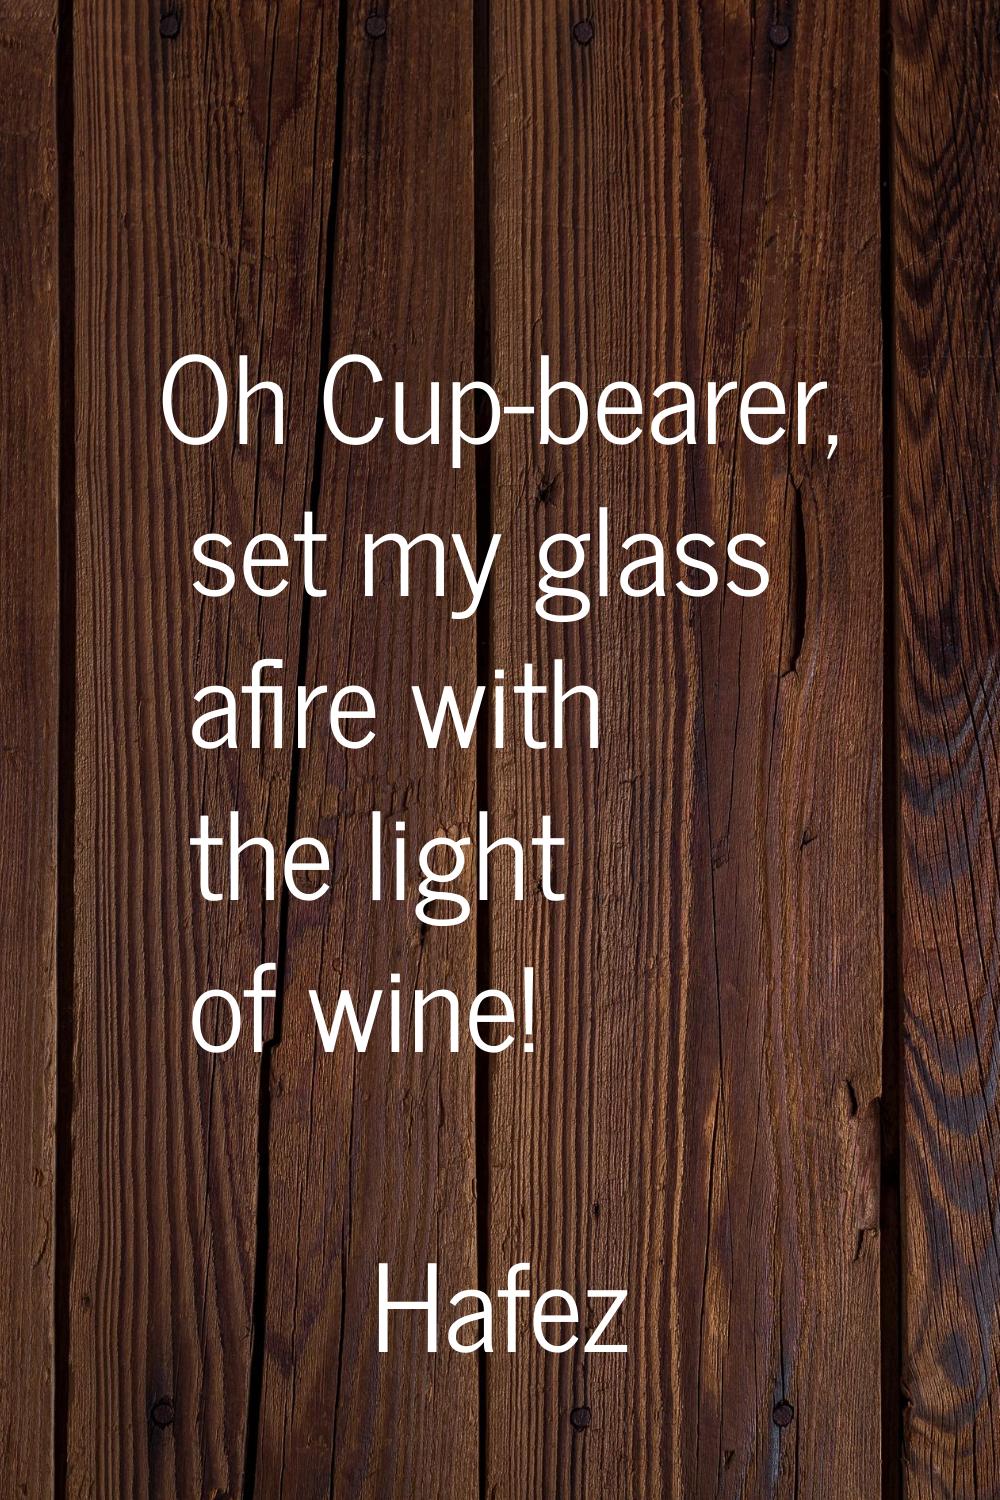 Oh Cup-bearer, set my glass afire with the light of wine!